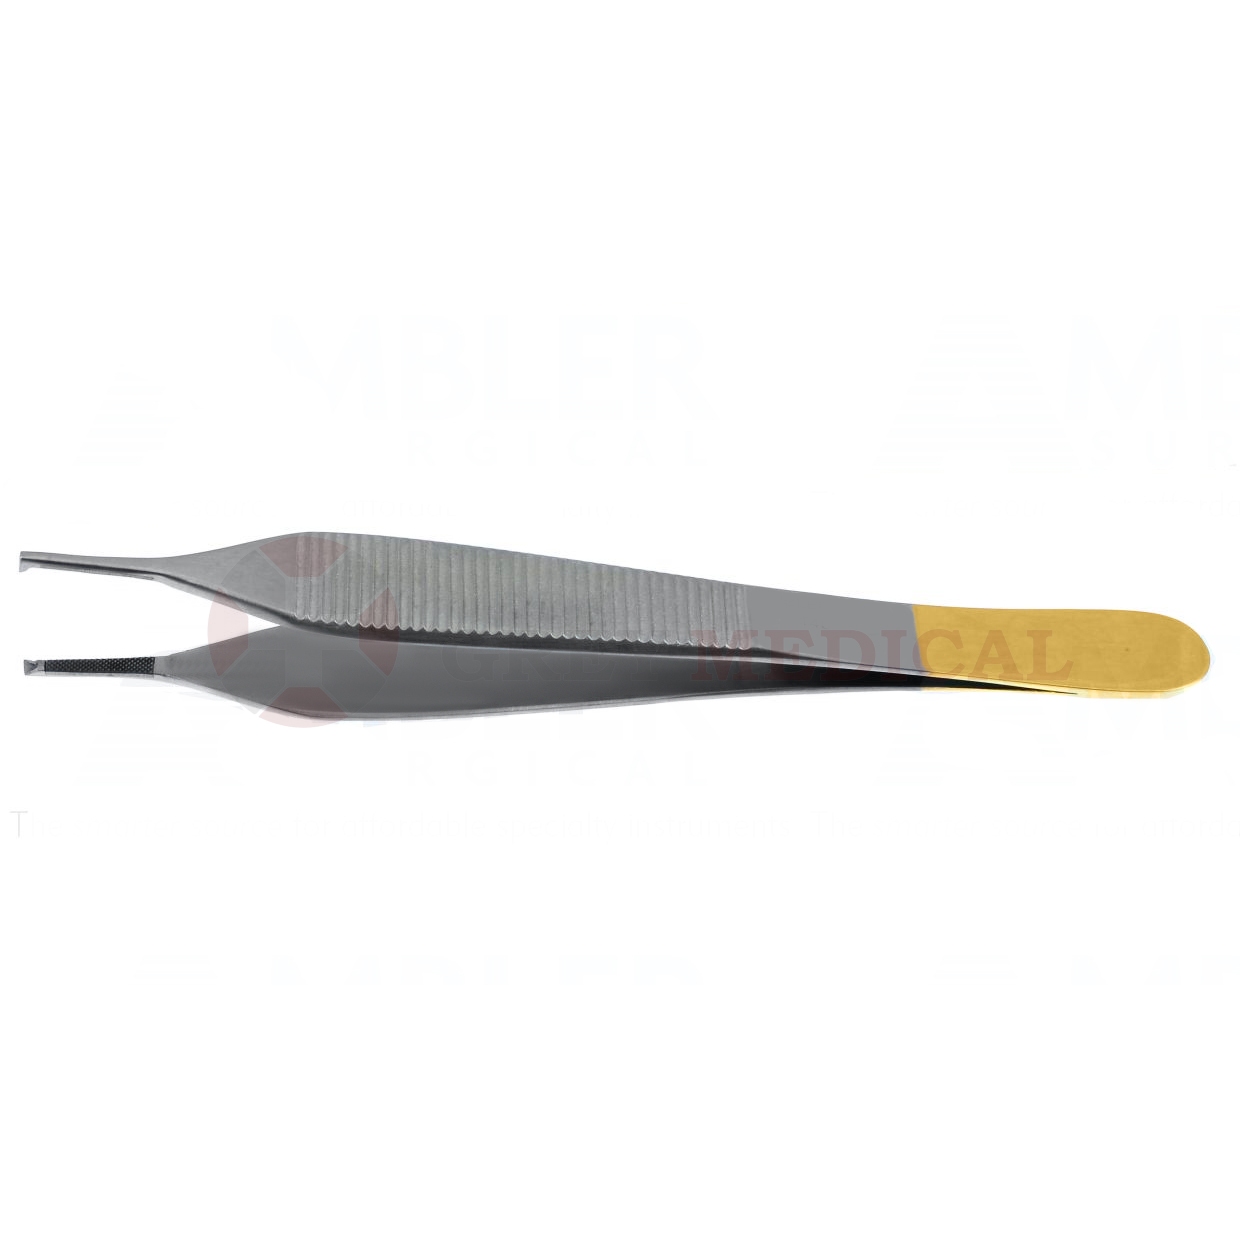 Adson Tissue and Suture Forceps, Tungsten Carbide 4000 Jaw